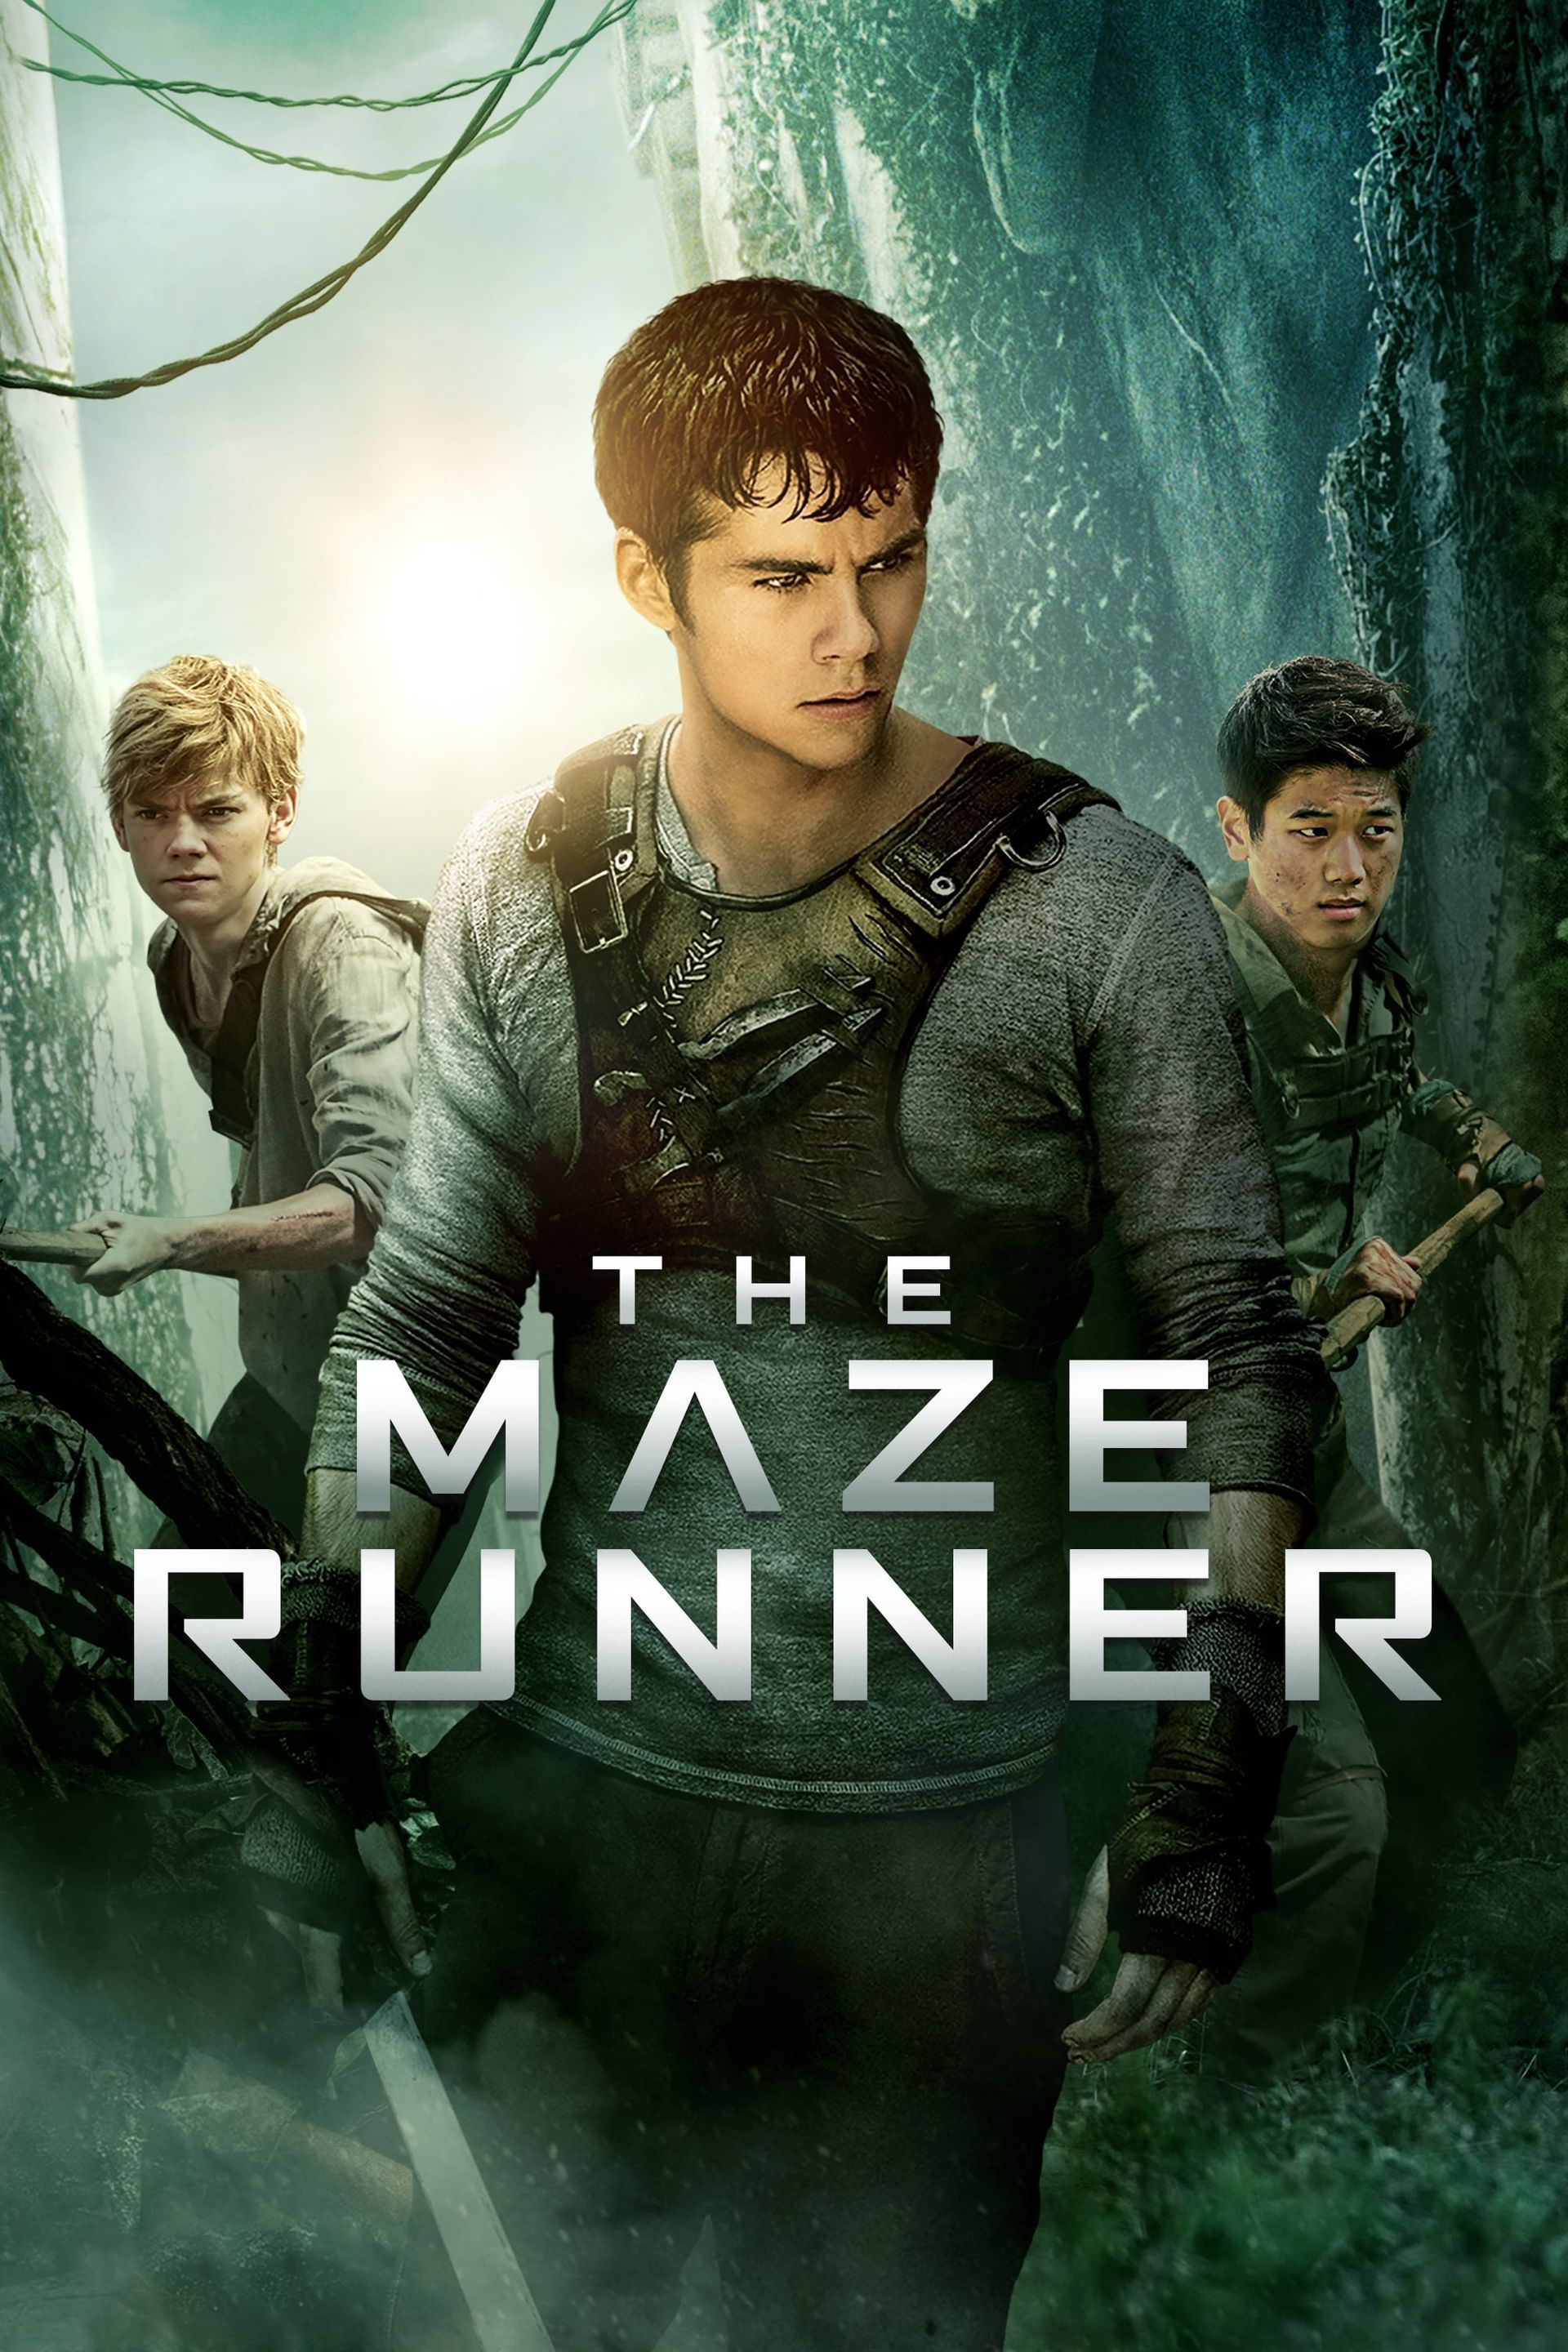 Newt being chased by a Griever in the maze runner mobile game